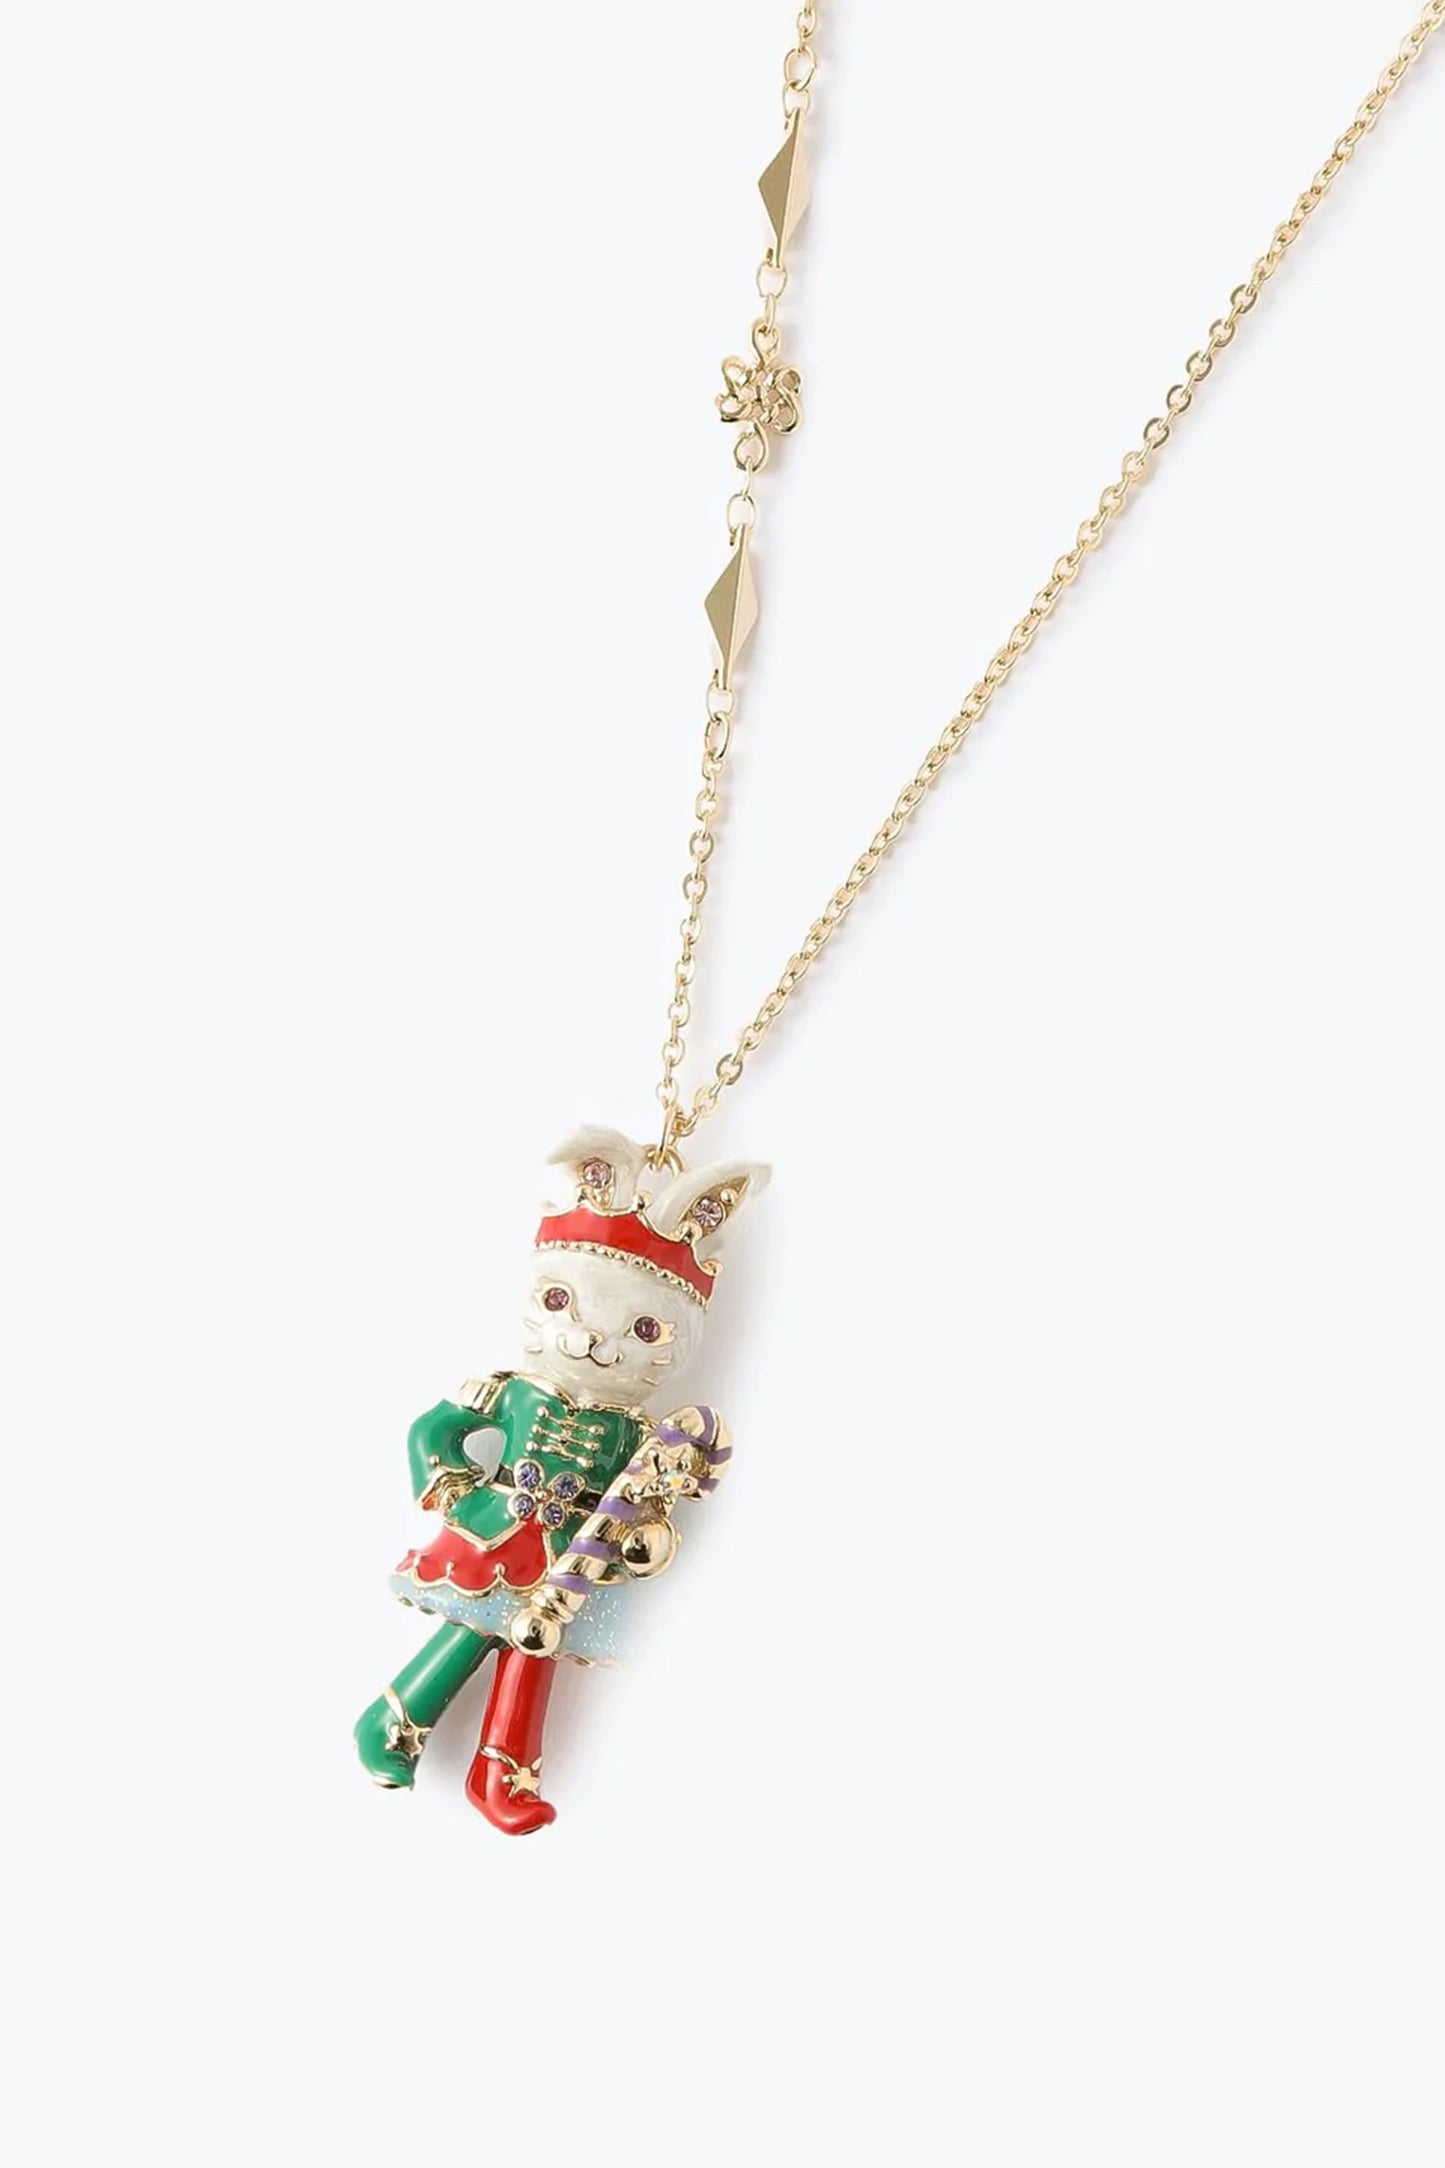 Pendant Christmas bunny on golden chain, white bunny dressed as a green and red nutcracker